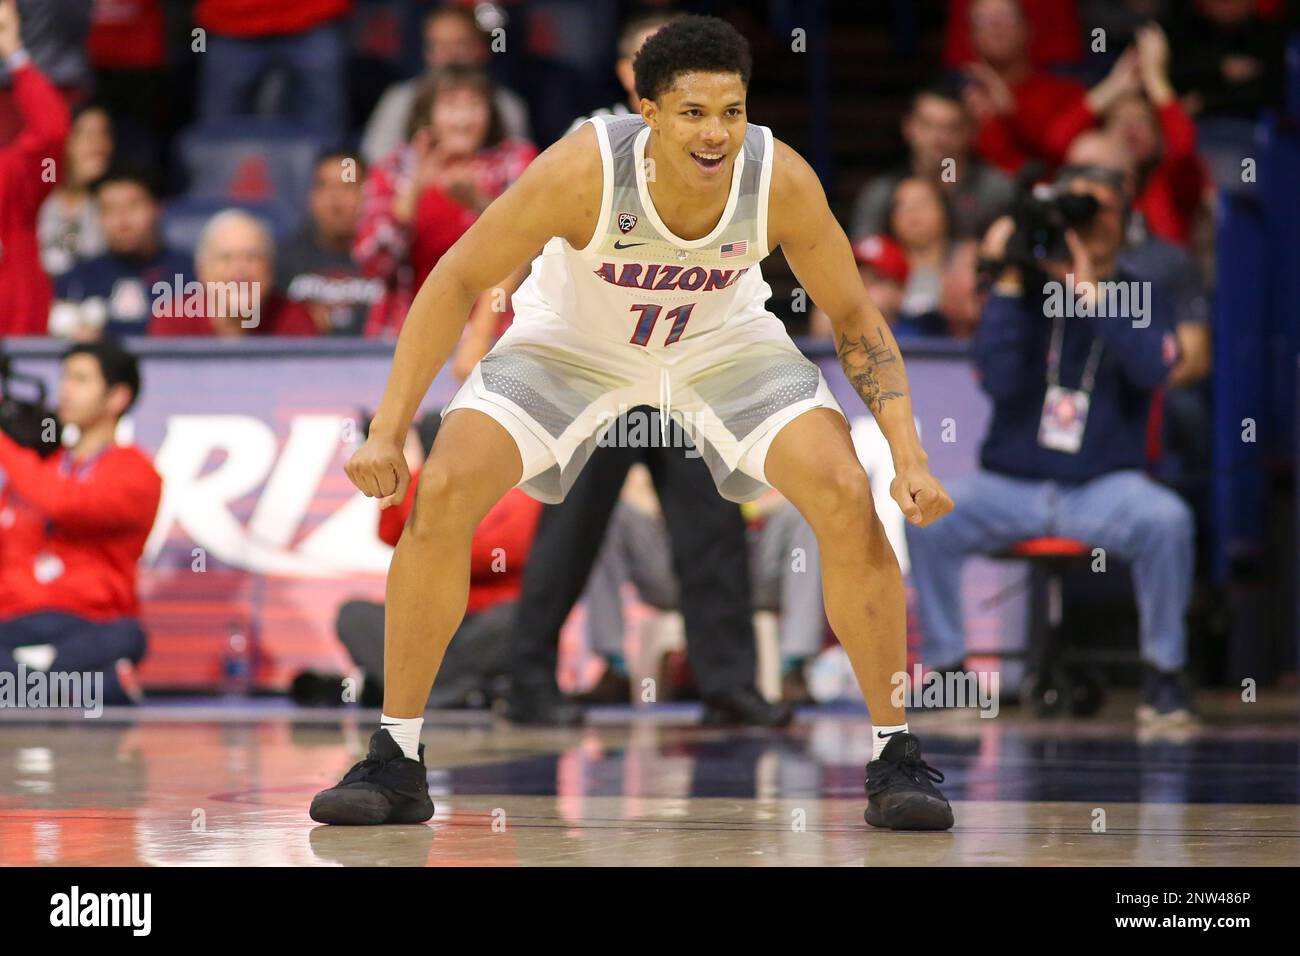 TUCSON, AZ - JANUARY 05: Arizona Wildcats forward Ira Lee (11) smiles  during the a college basketball game between the Utah Utes and the Arizona  Wildcats on January 05, 2019, at McKale